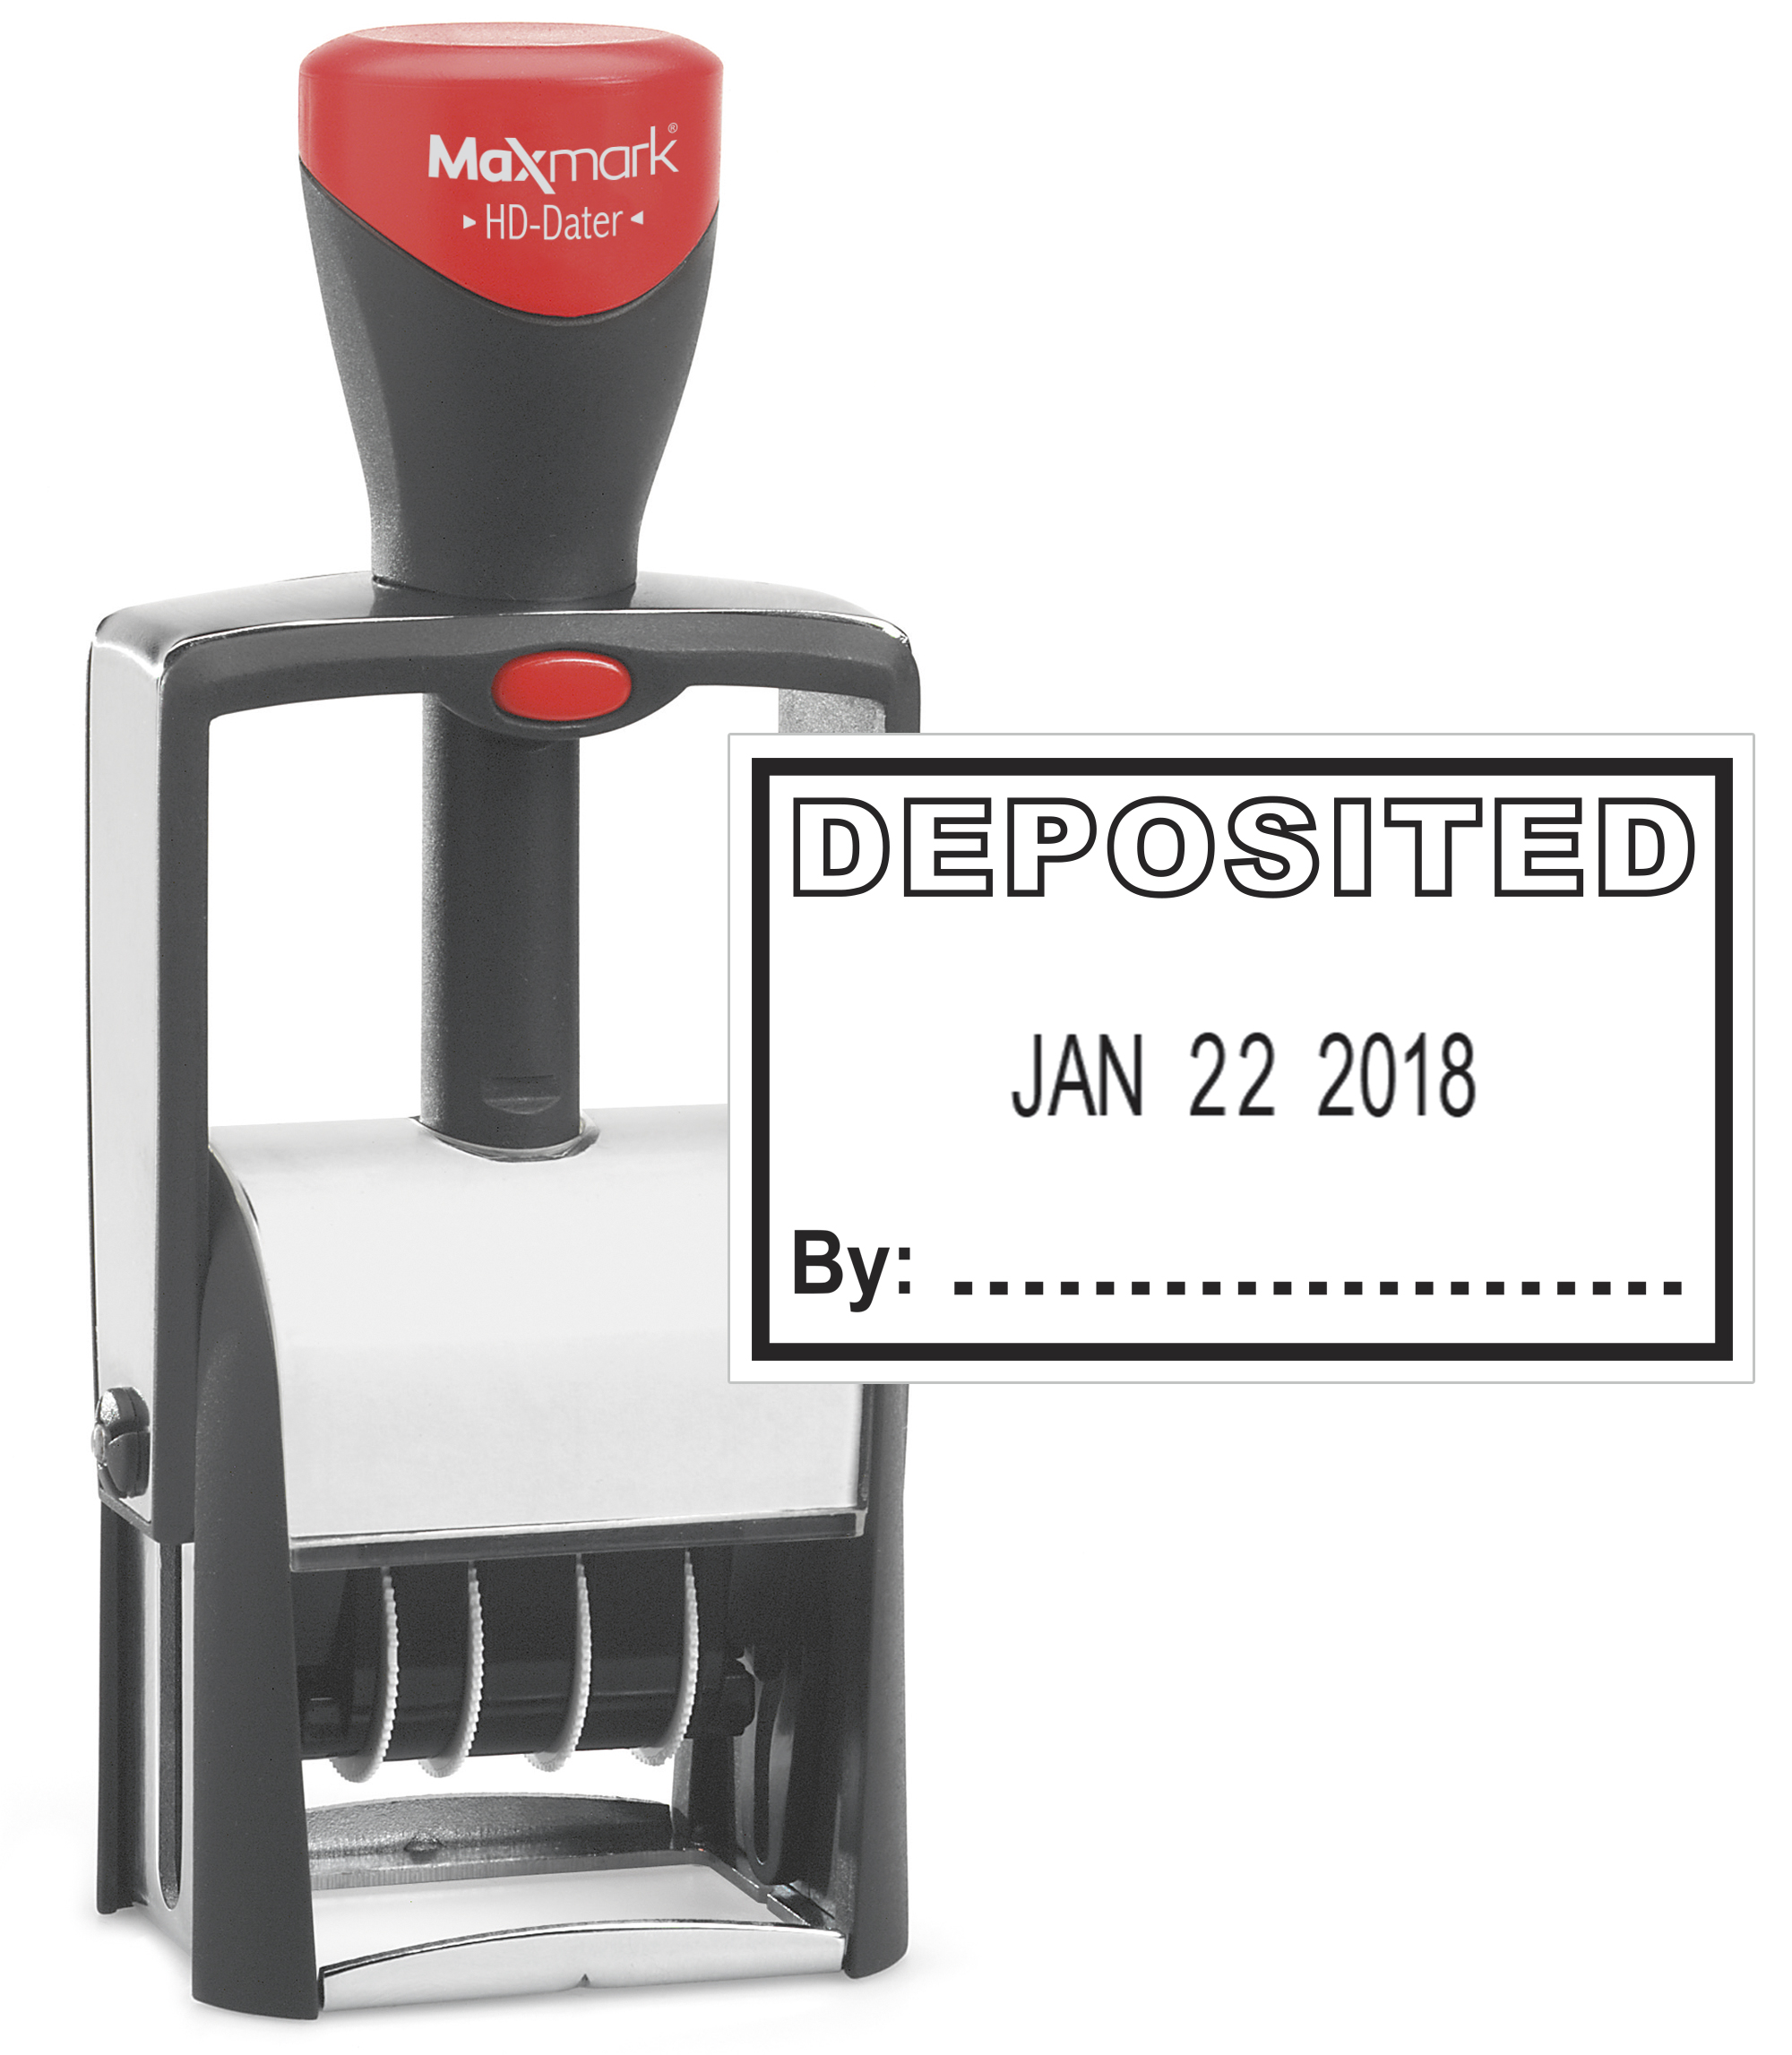 Heavy Duty Date Stamp with "DEPOSITED" Self Inking Stamp - BLACK Ink